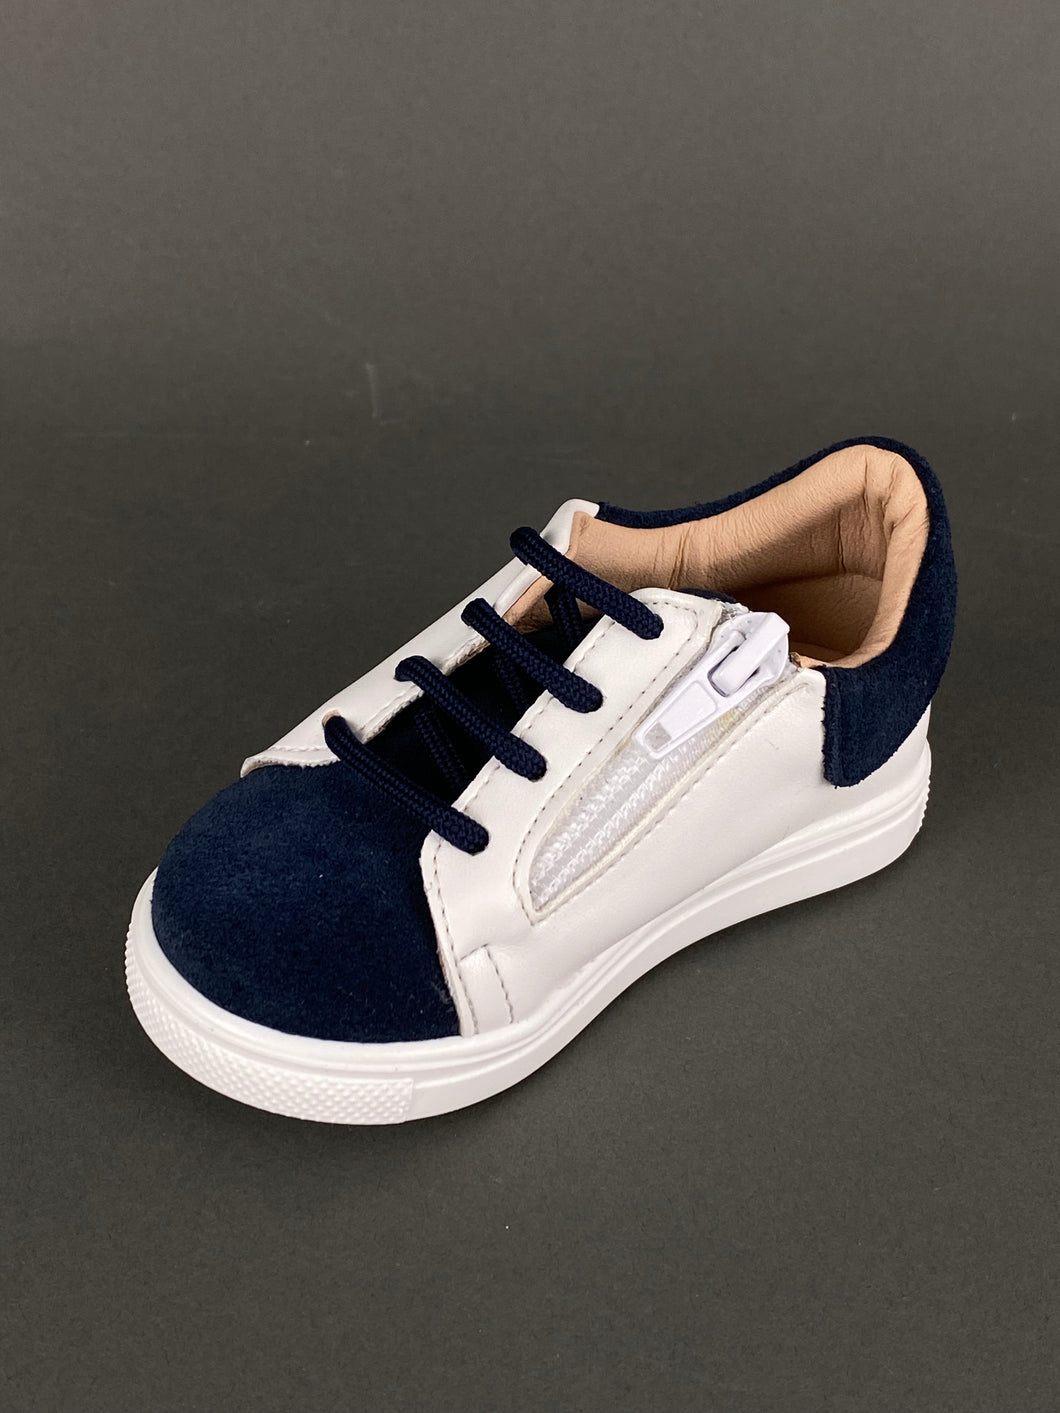 Gorgino White Leather with Navy Blue Suede, Shoelaces and Zipper GH201735